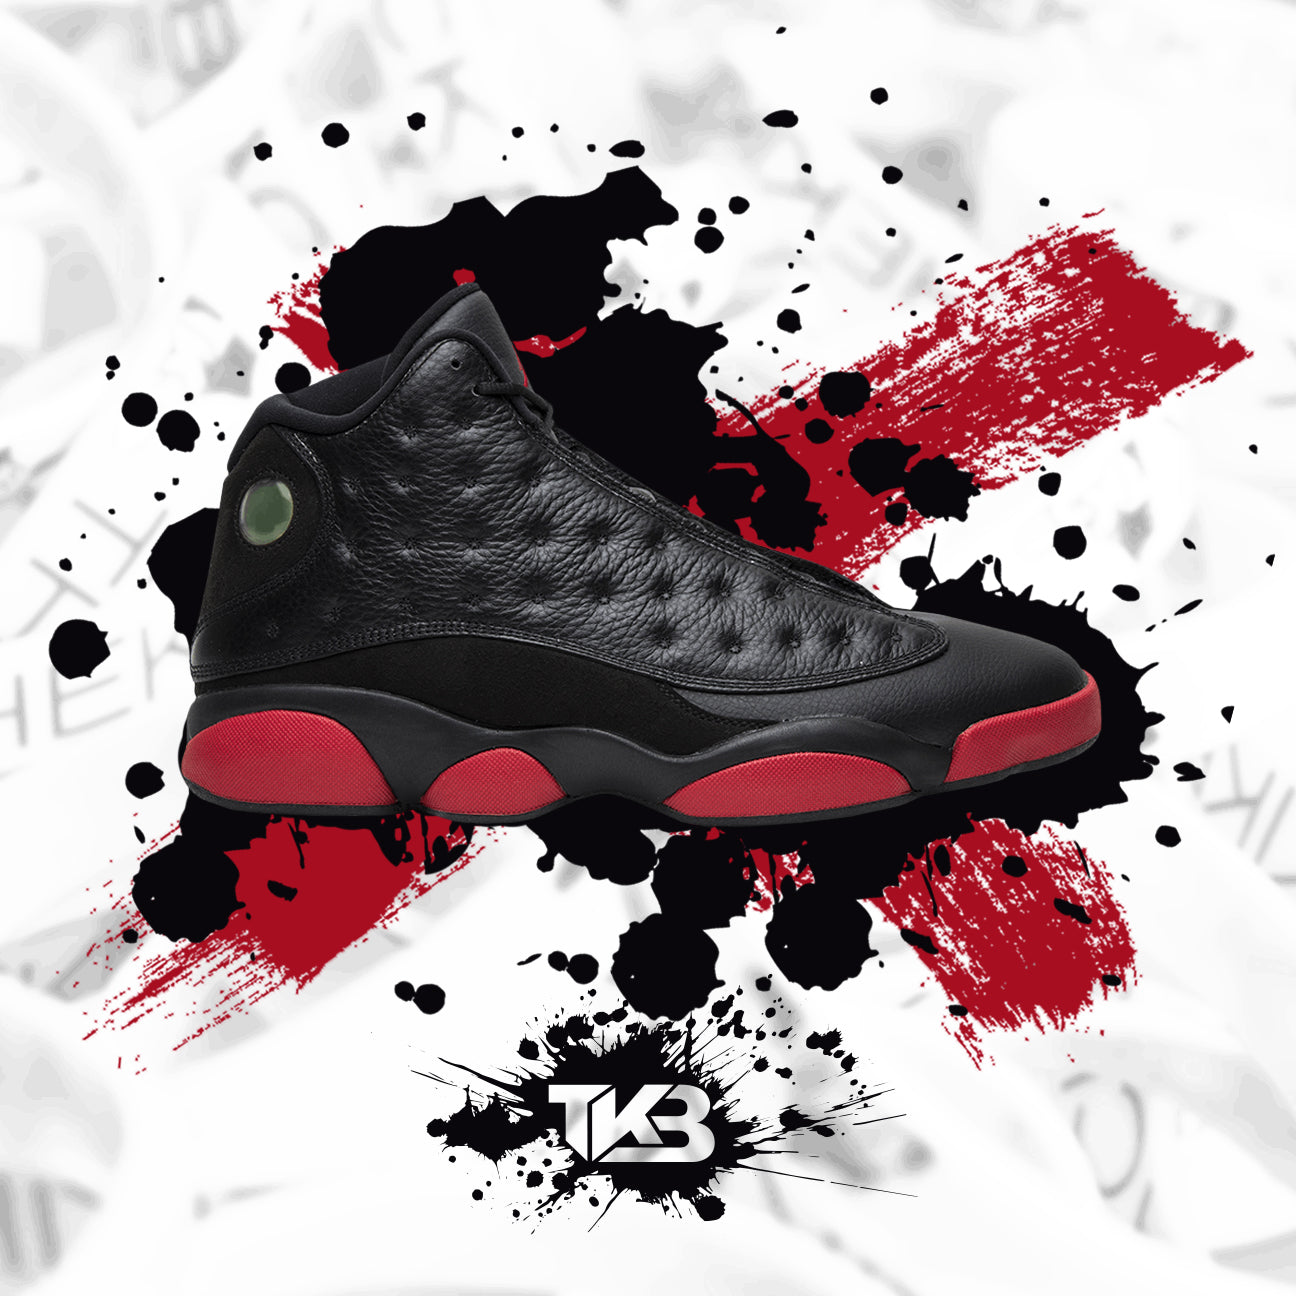 Dirty Bred 13